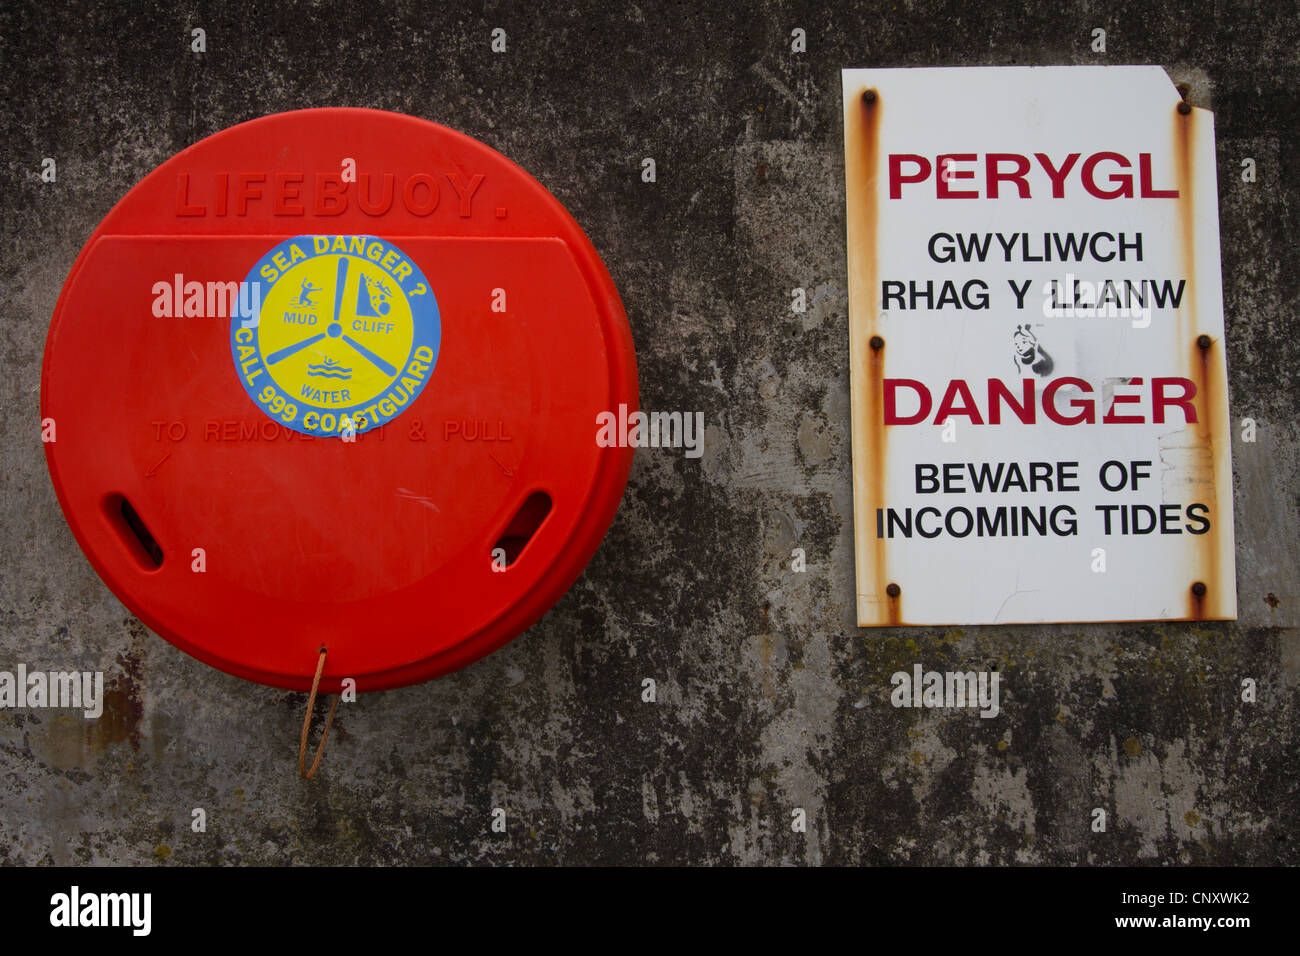 Red lifebuoy and  signs in English and Welsh warning of danger of incoming tides. Stock Photo